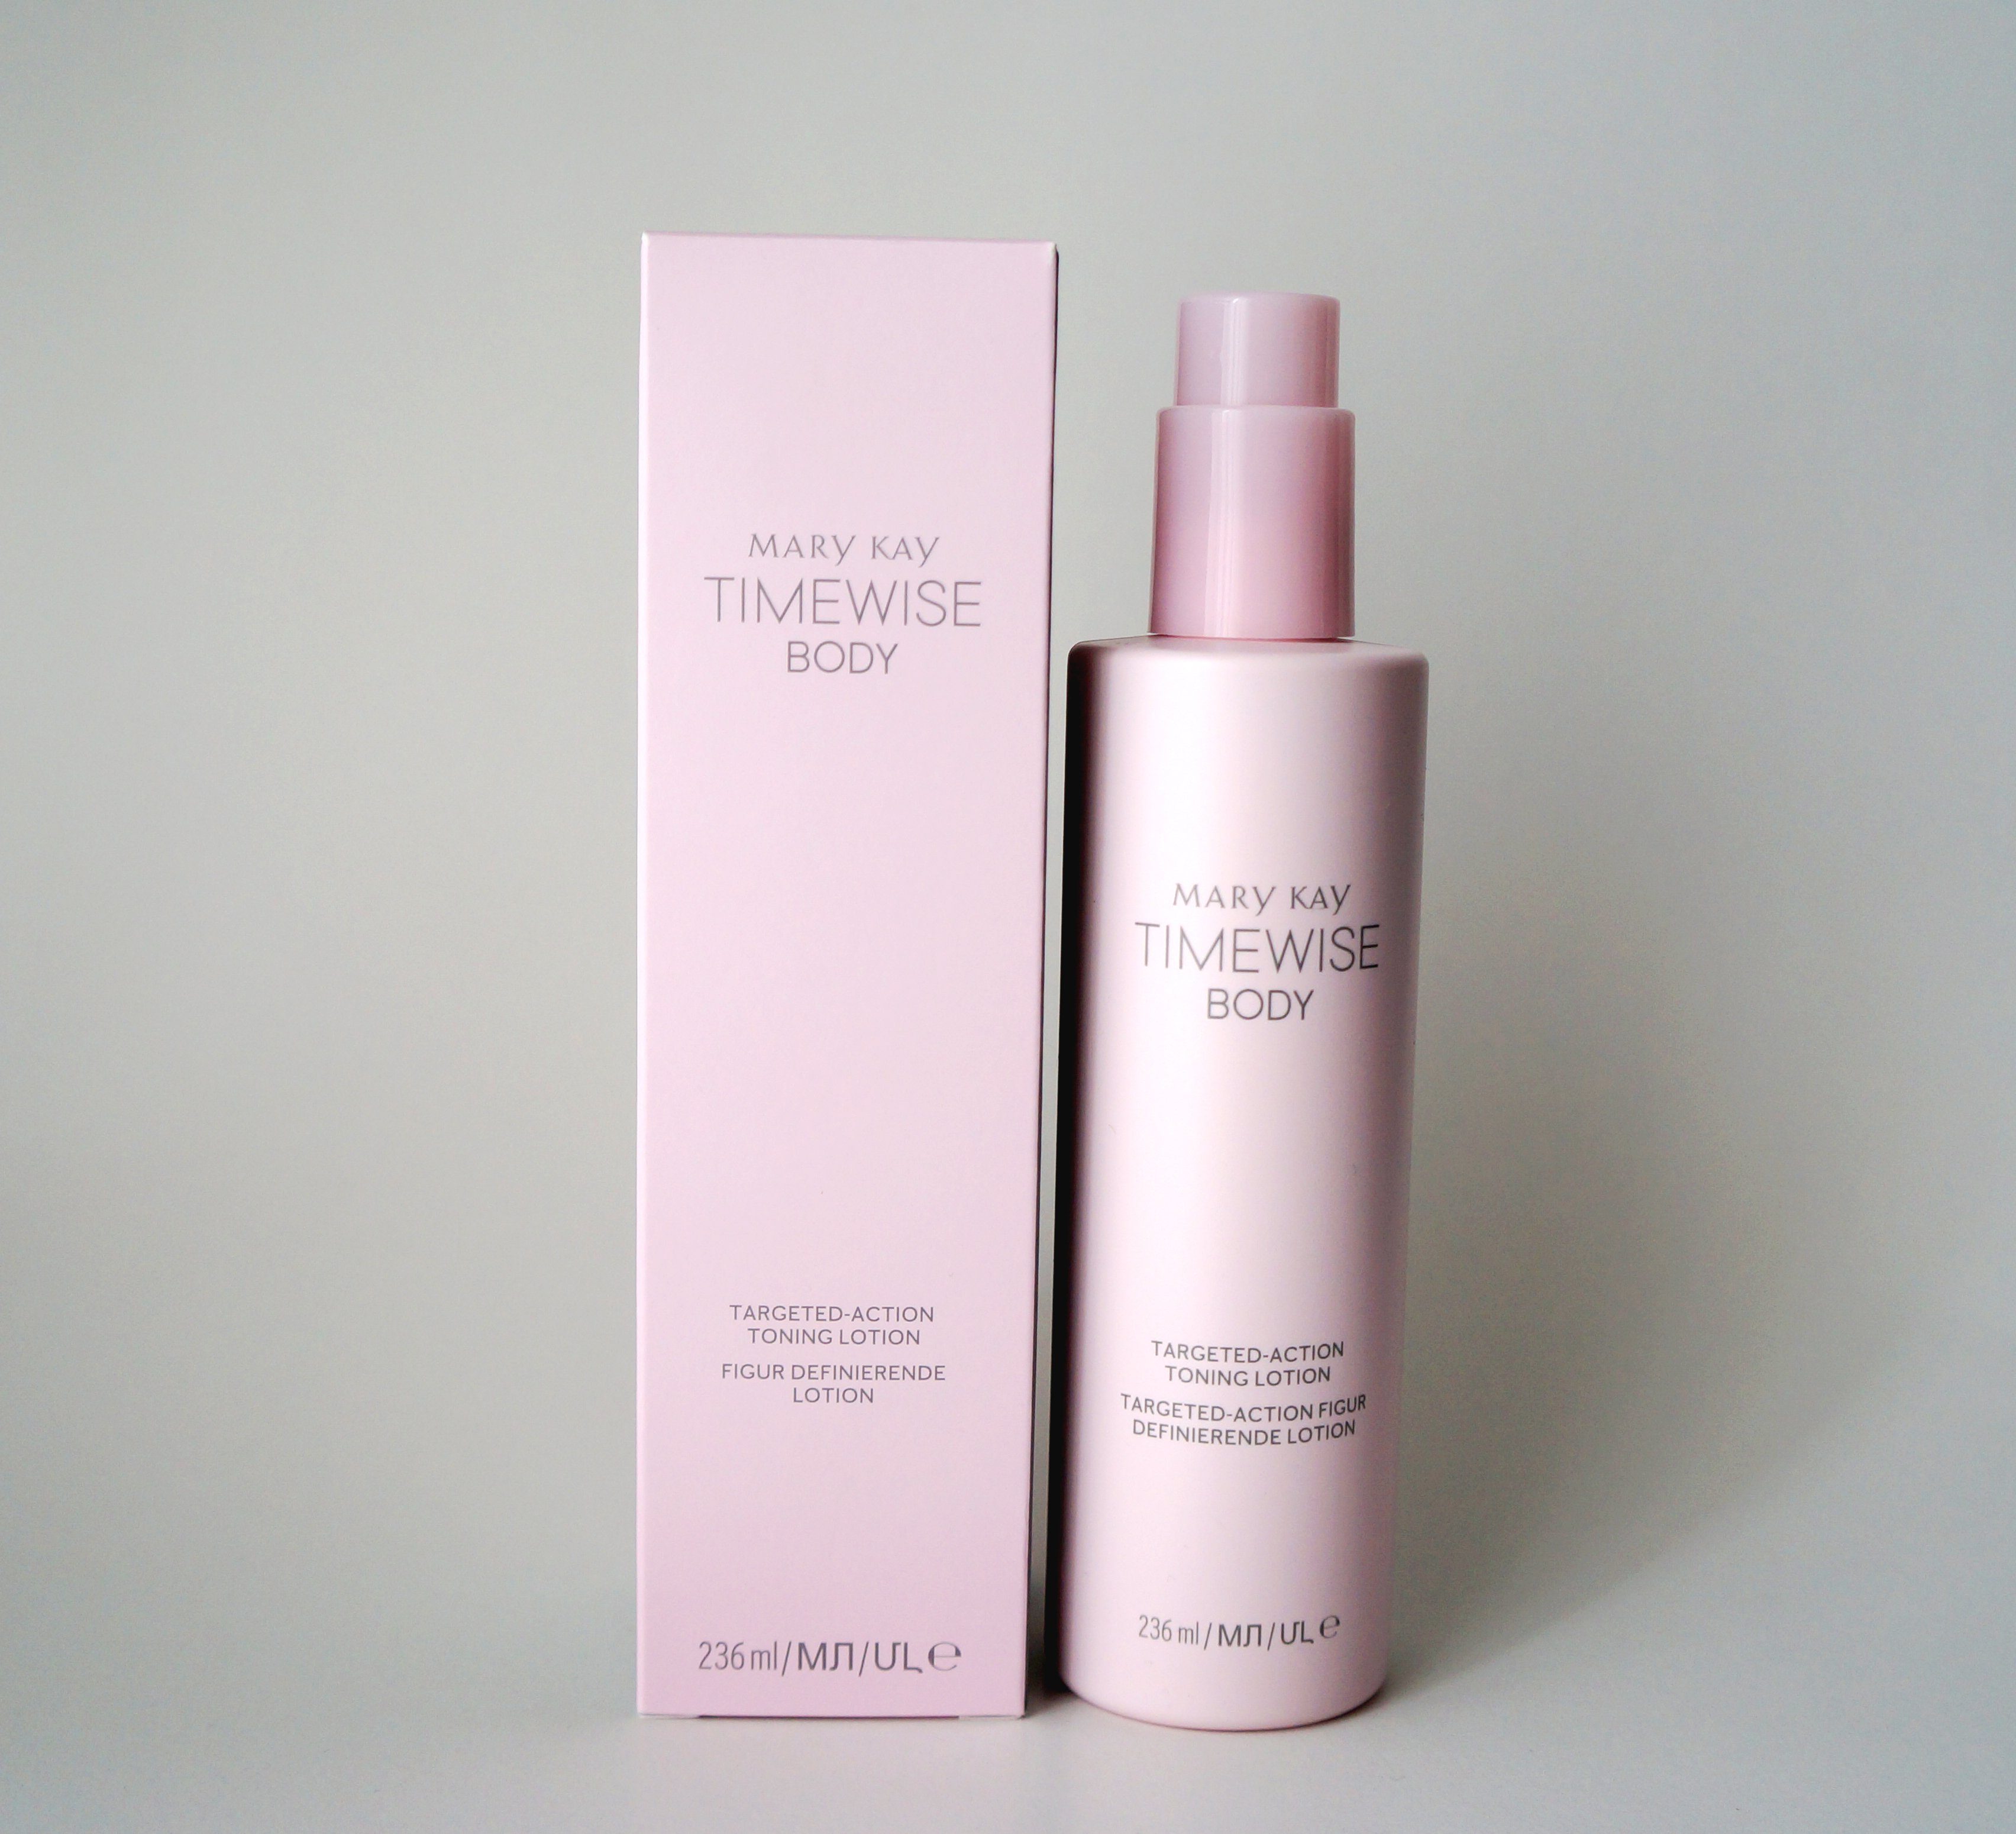 Mary Kay Körperlotion Mary Kay TimeWise Body Targeted-Action Toning Lotion 236ml